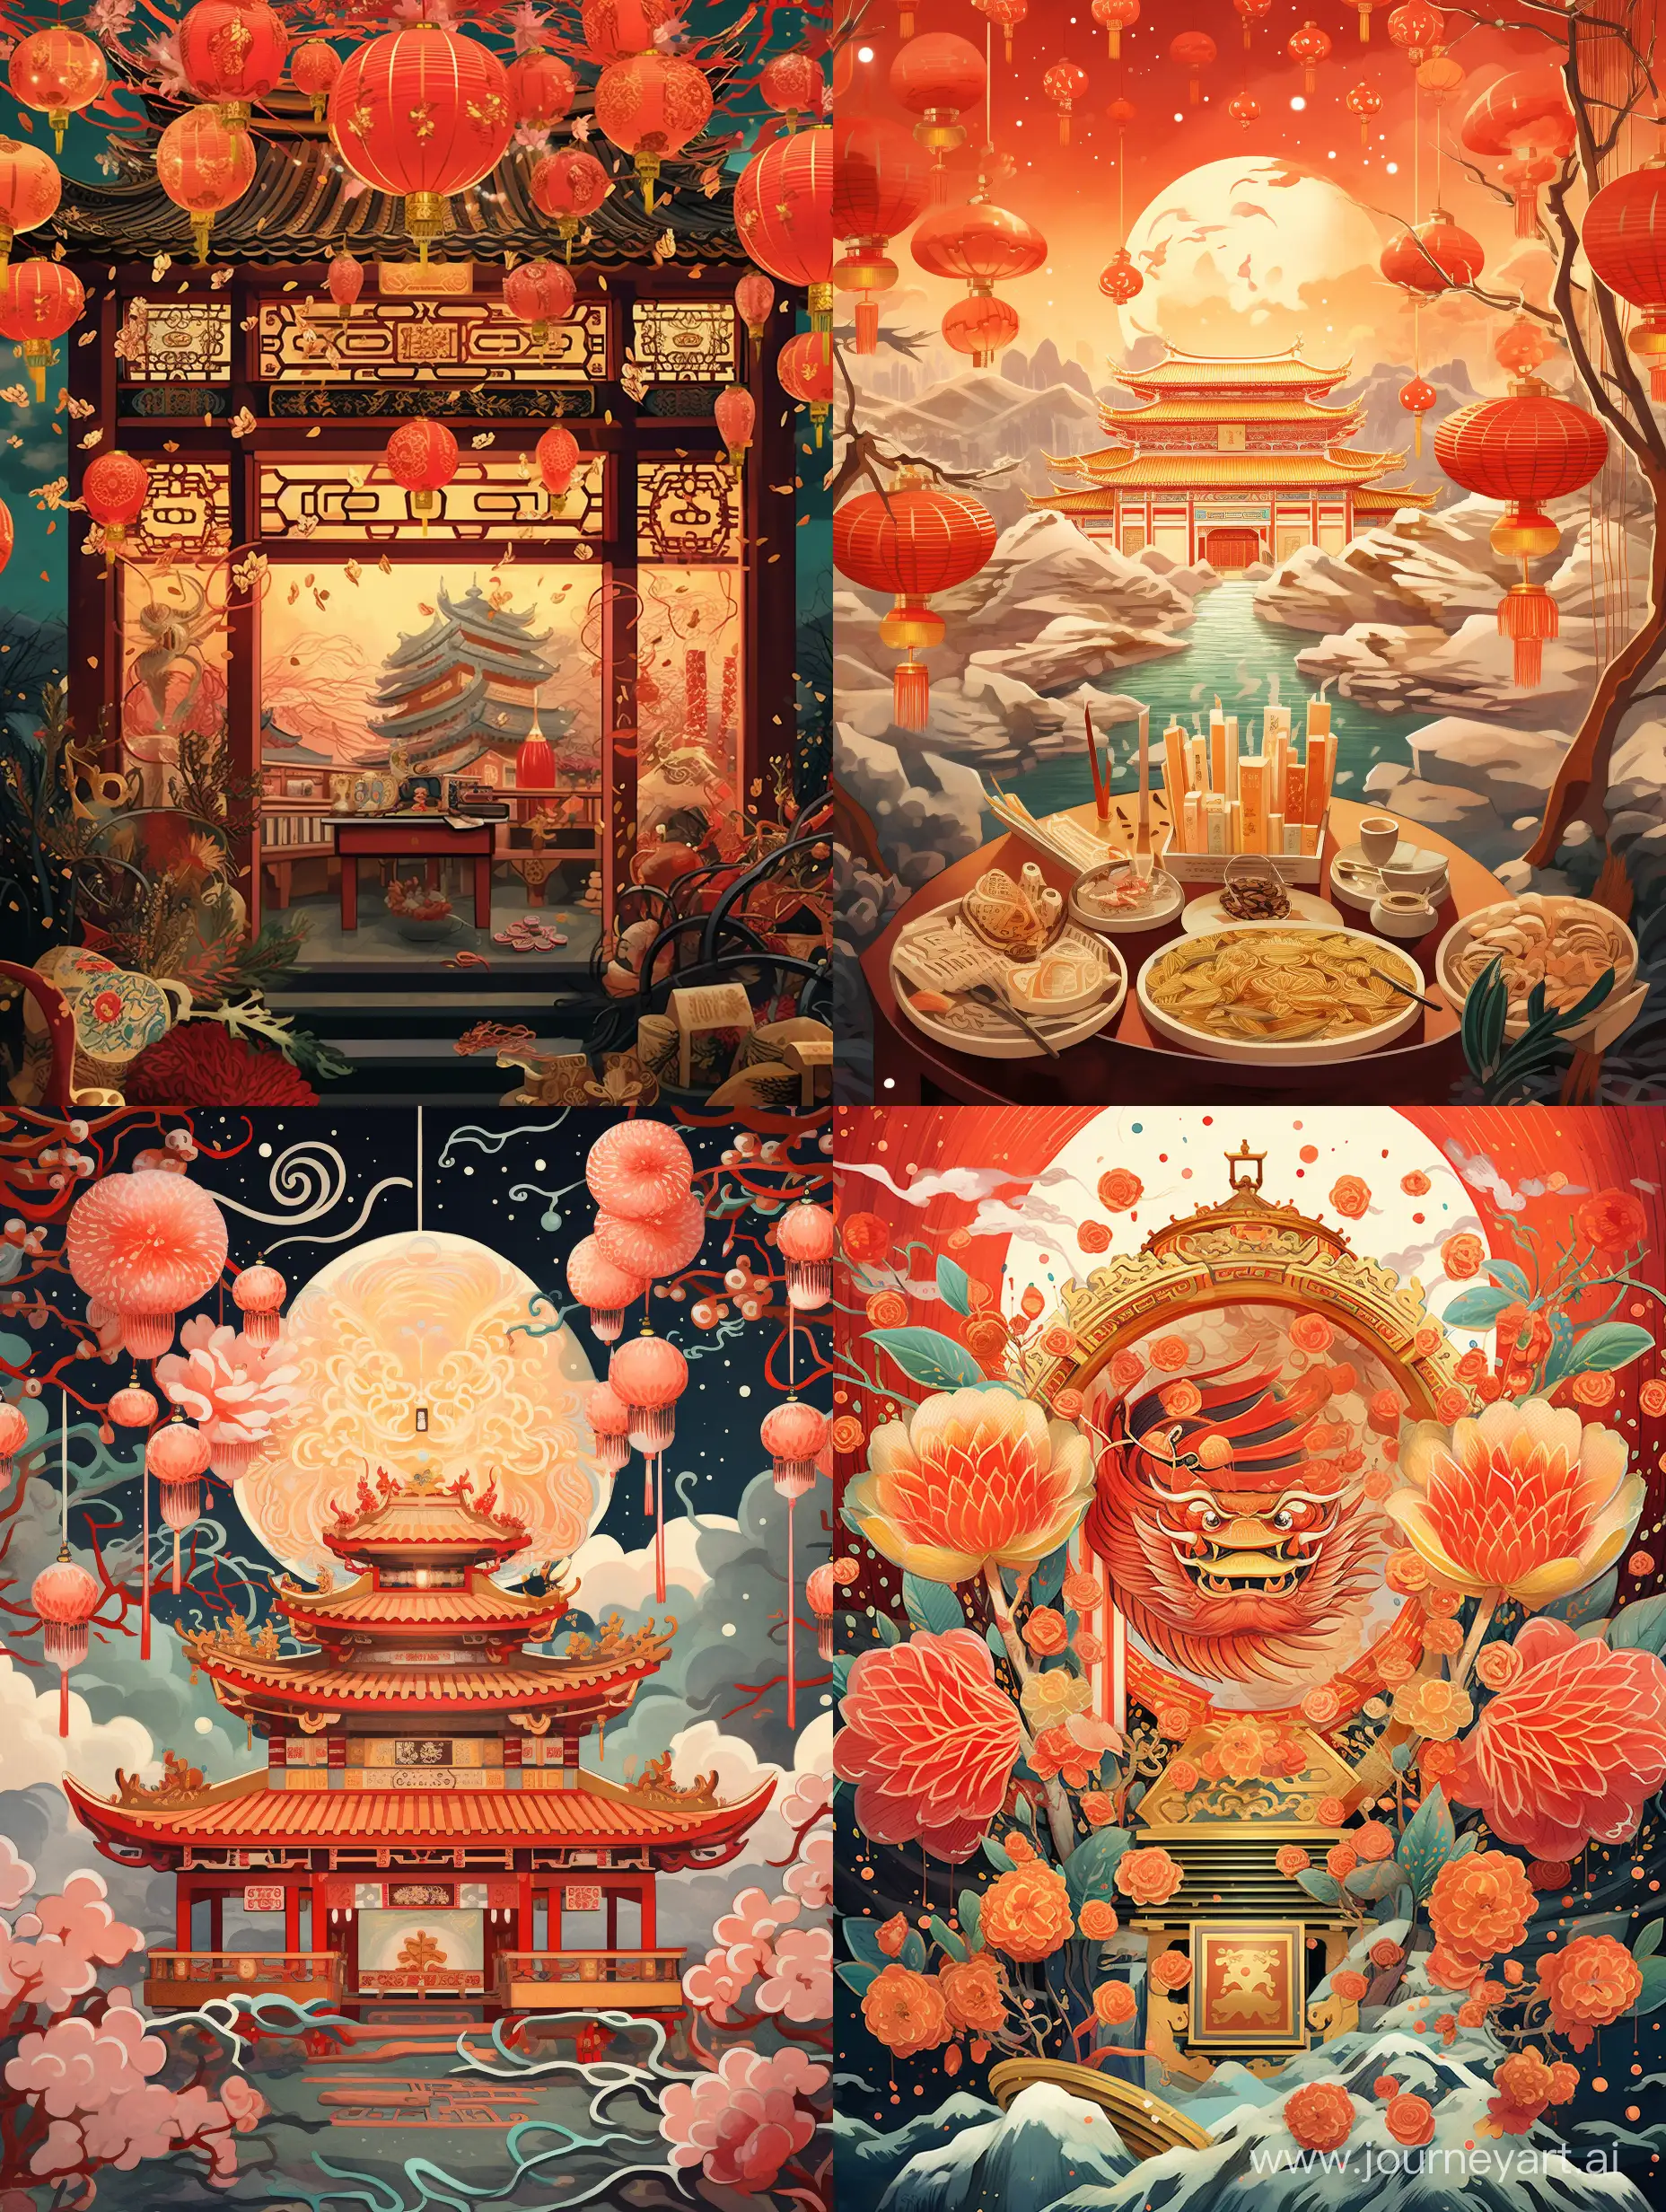 Chinese dragon in the center, fairy tale illustration, stylized cartoon, Victo Ngai, watercolor, painting, decoration, flat drawing. Chinese New Year, lanterns, fireworks, golden ingots, red envelopes